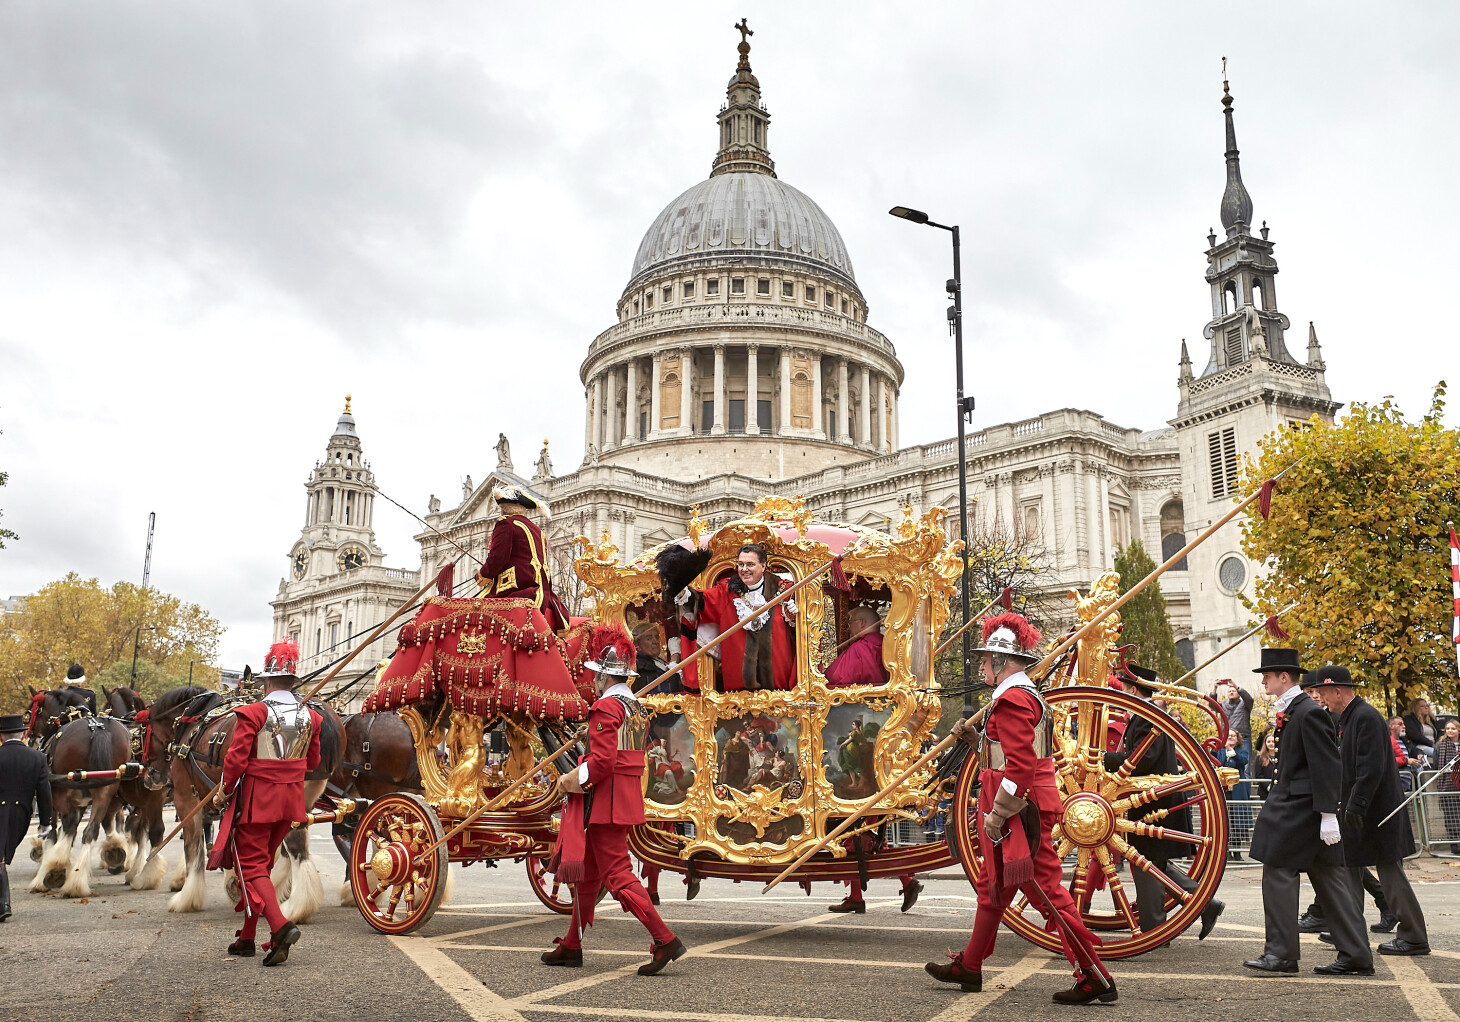 The Lord Mayor's Show